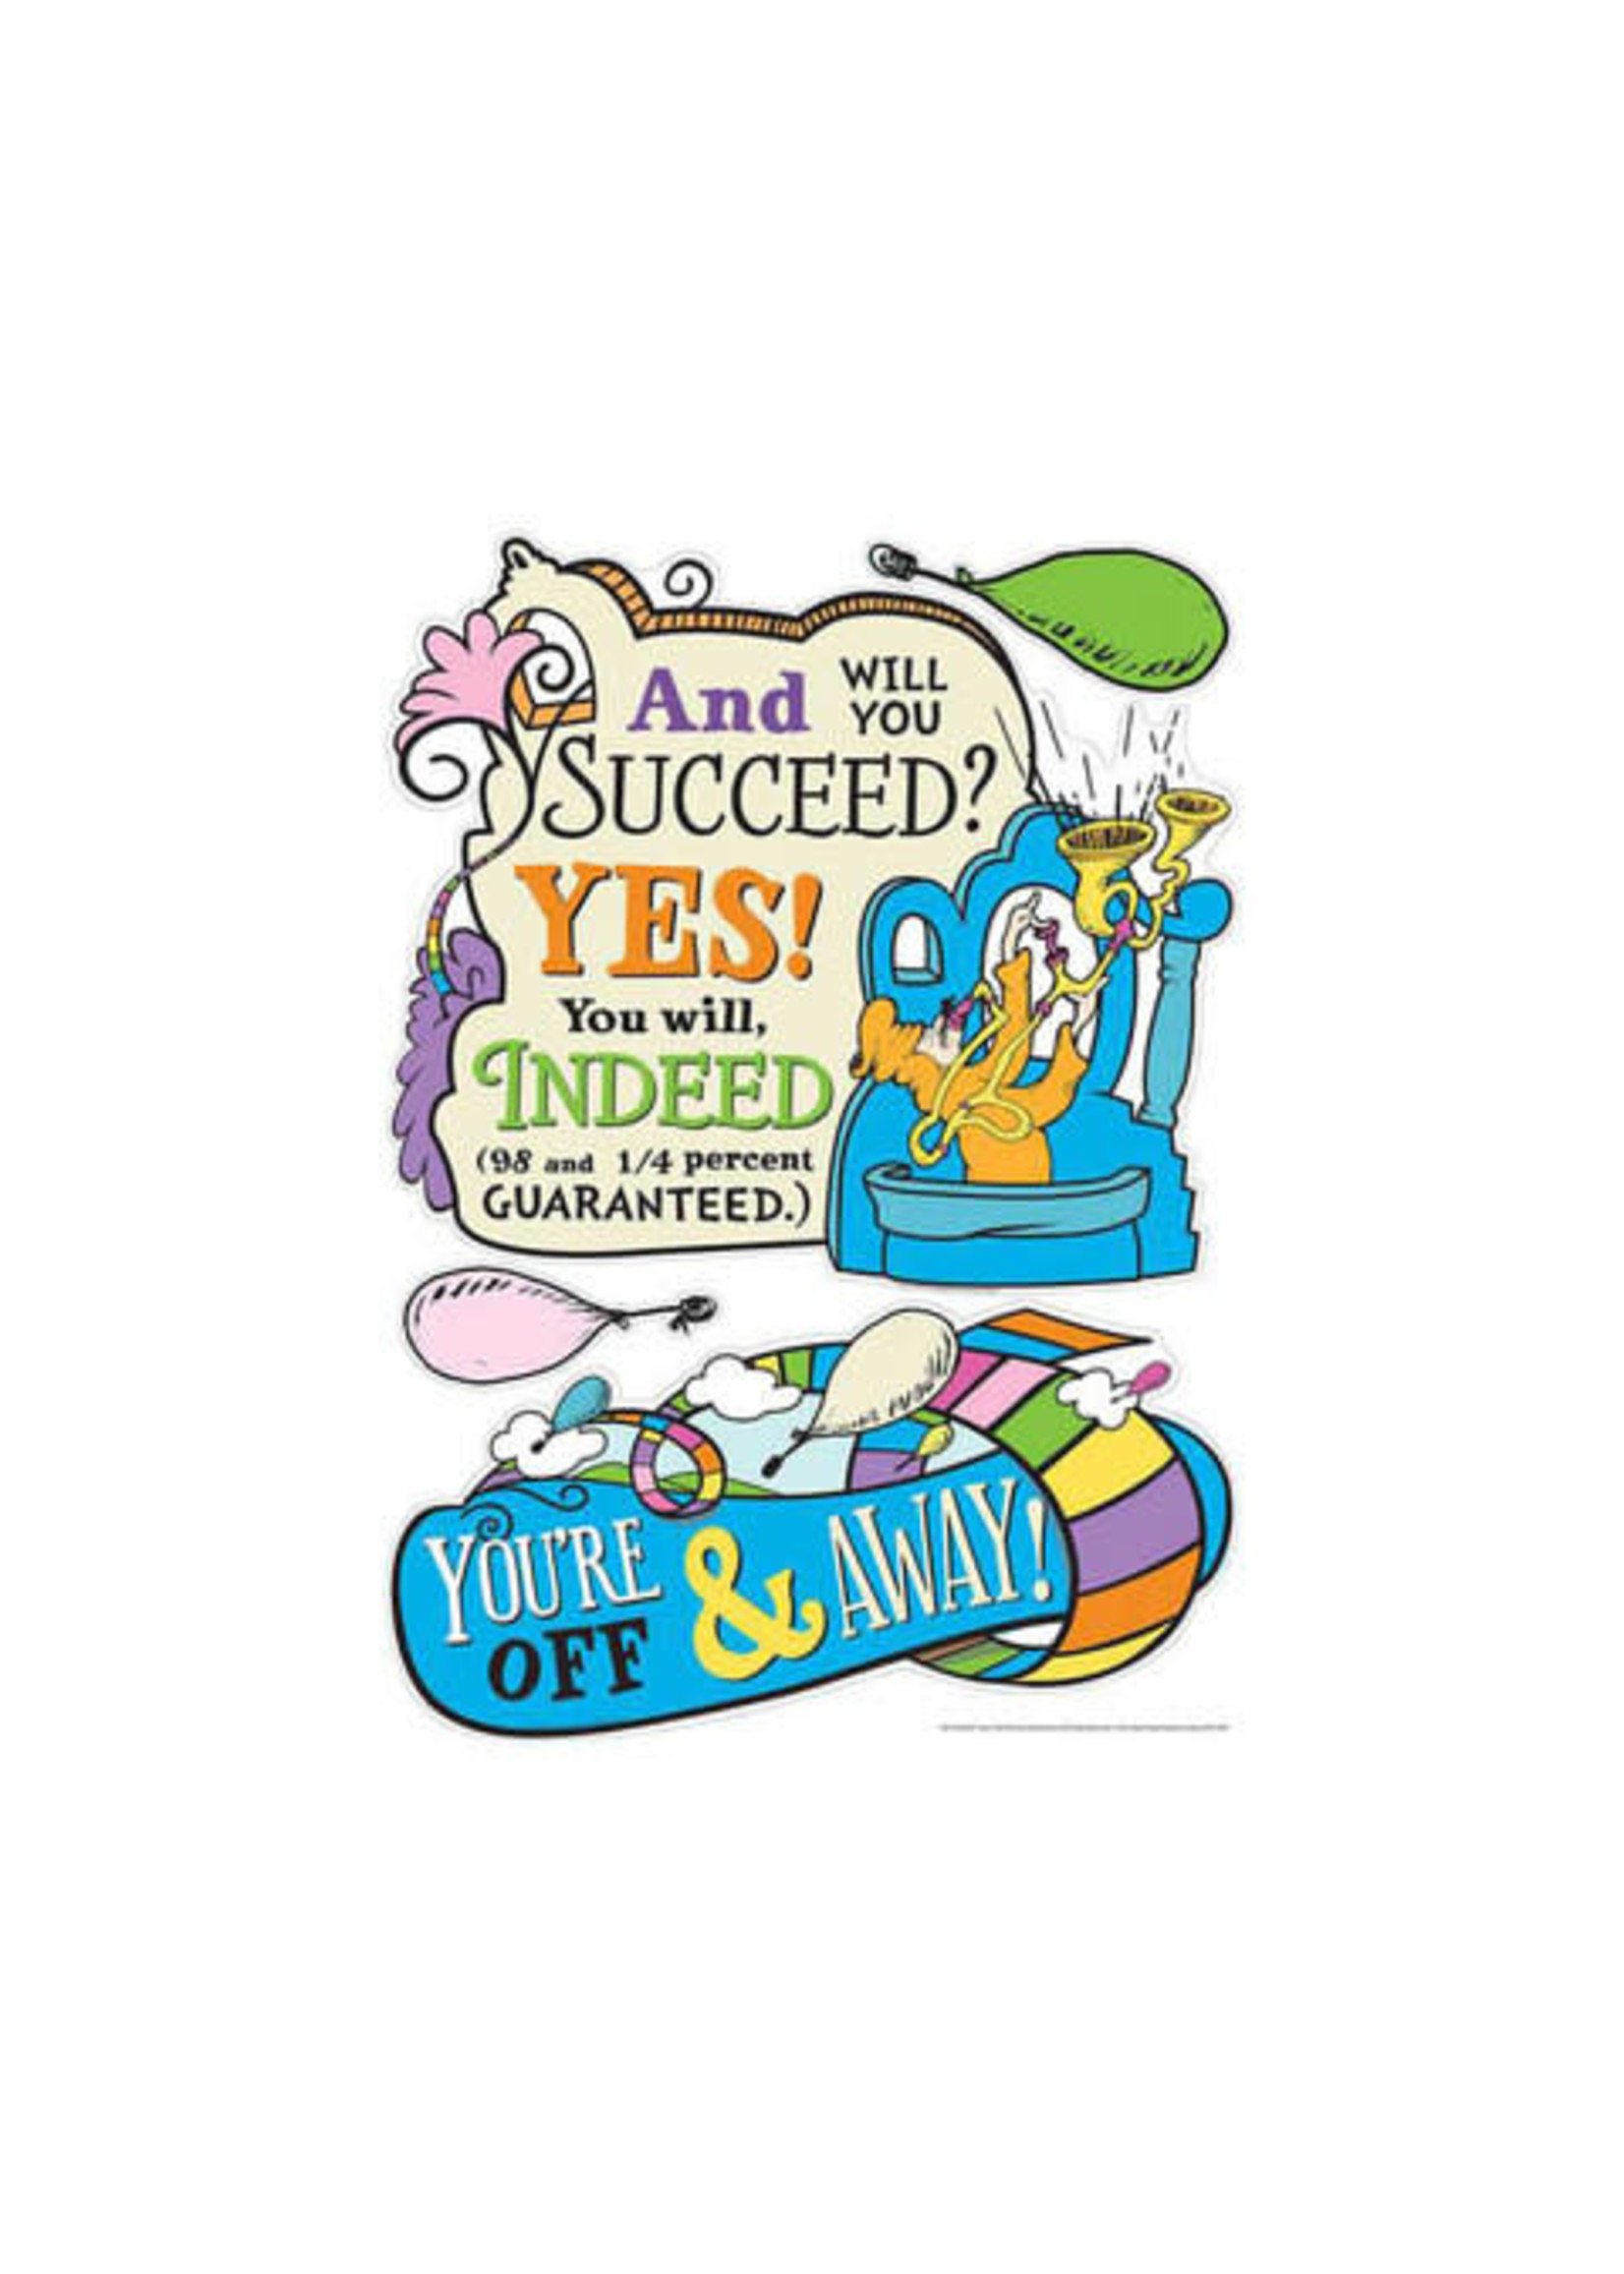 bbs-dr-seuss-oh-the-places-you-educational-outfitters